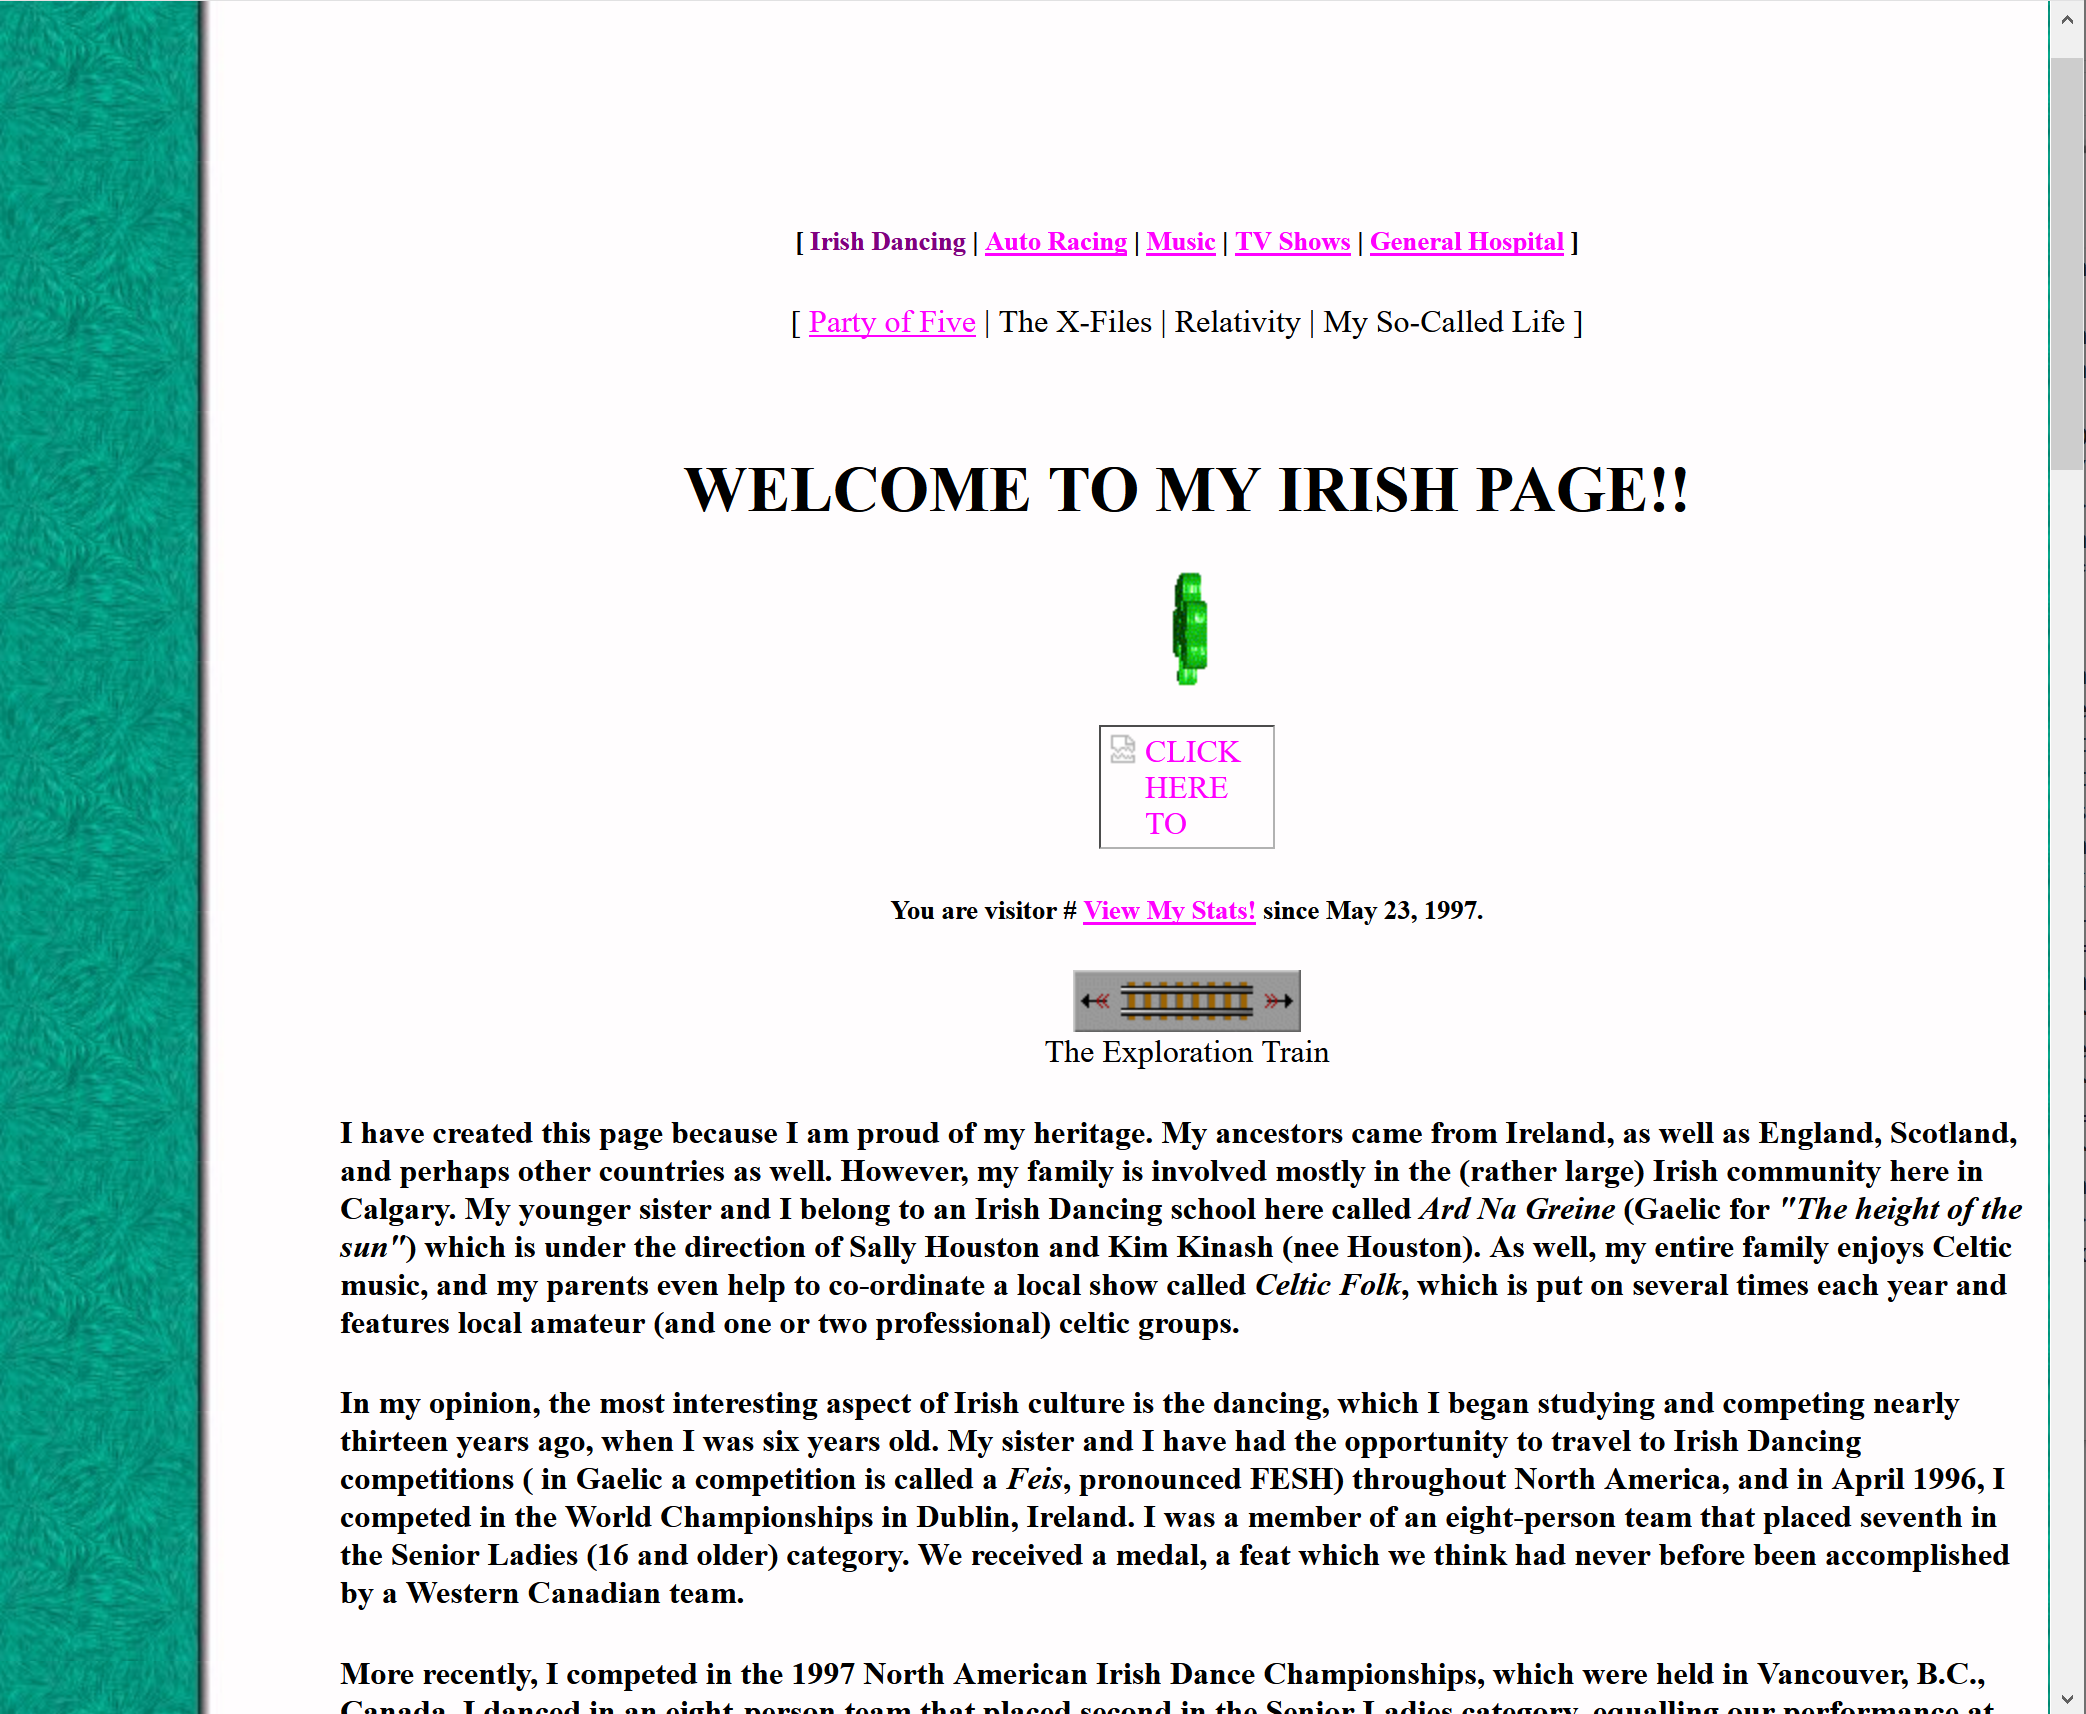 Dianne's Irish Dance and Culture Page